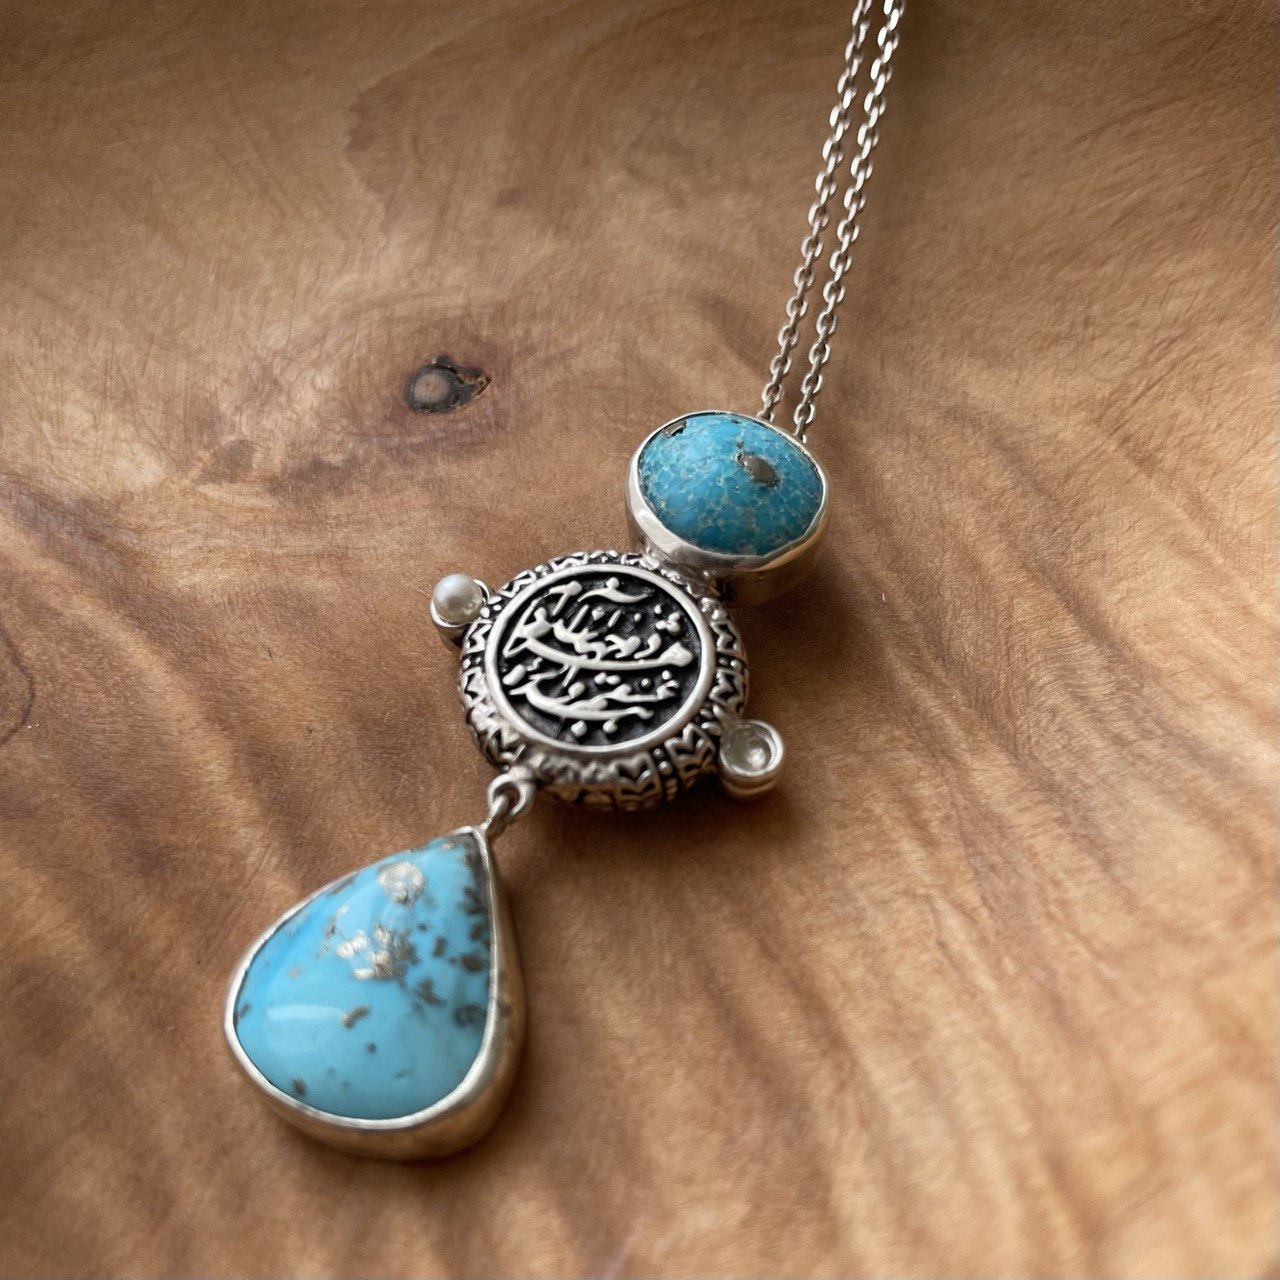 Persian Necklaces-Handmade Silver Necklace with Persian Calligraphy and Turquoise: Persian Jewelry-AFRA ART GALLERY